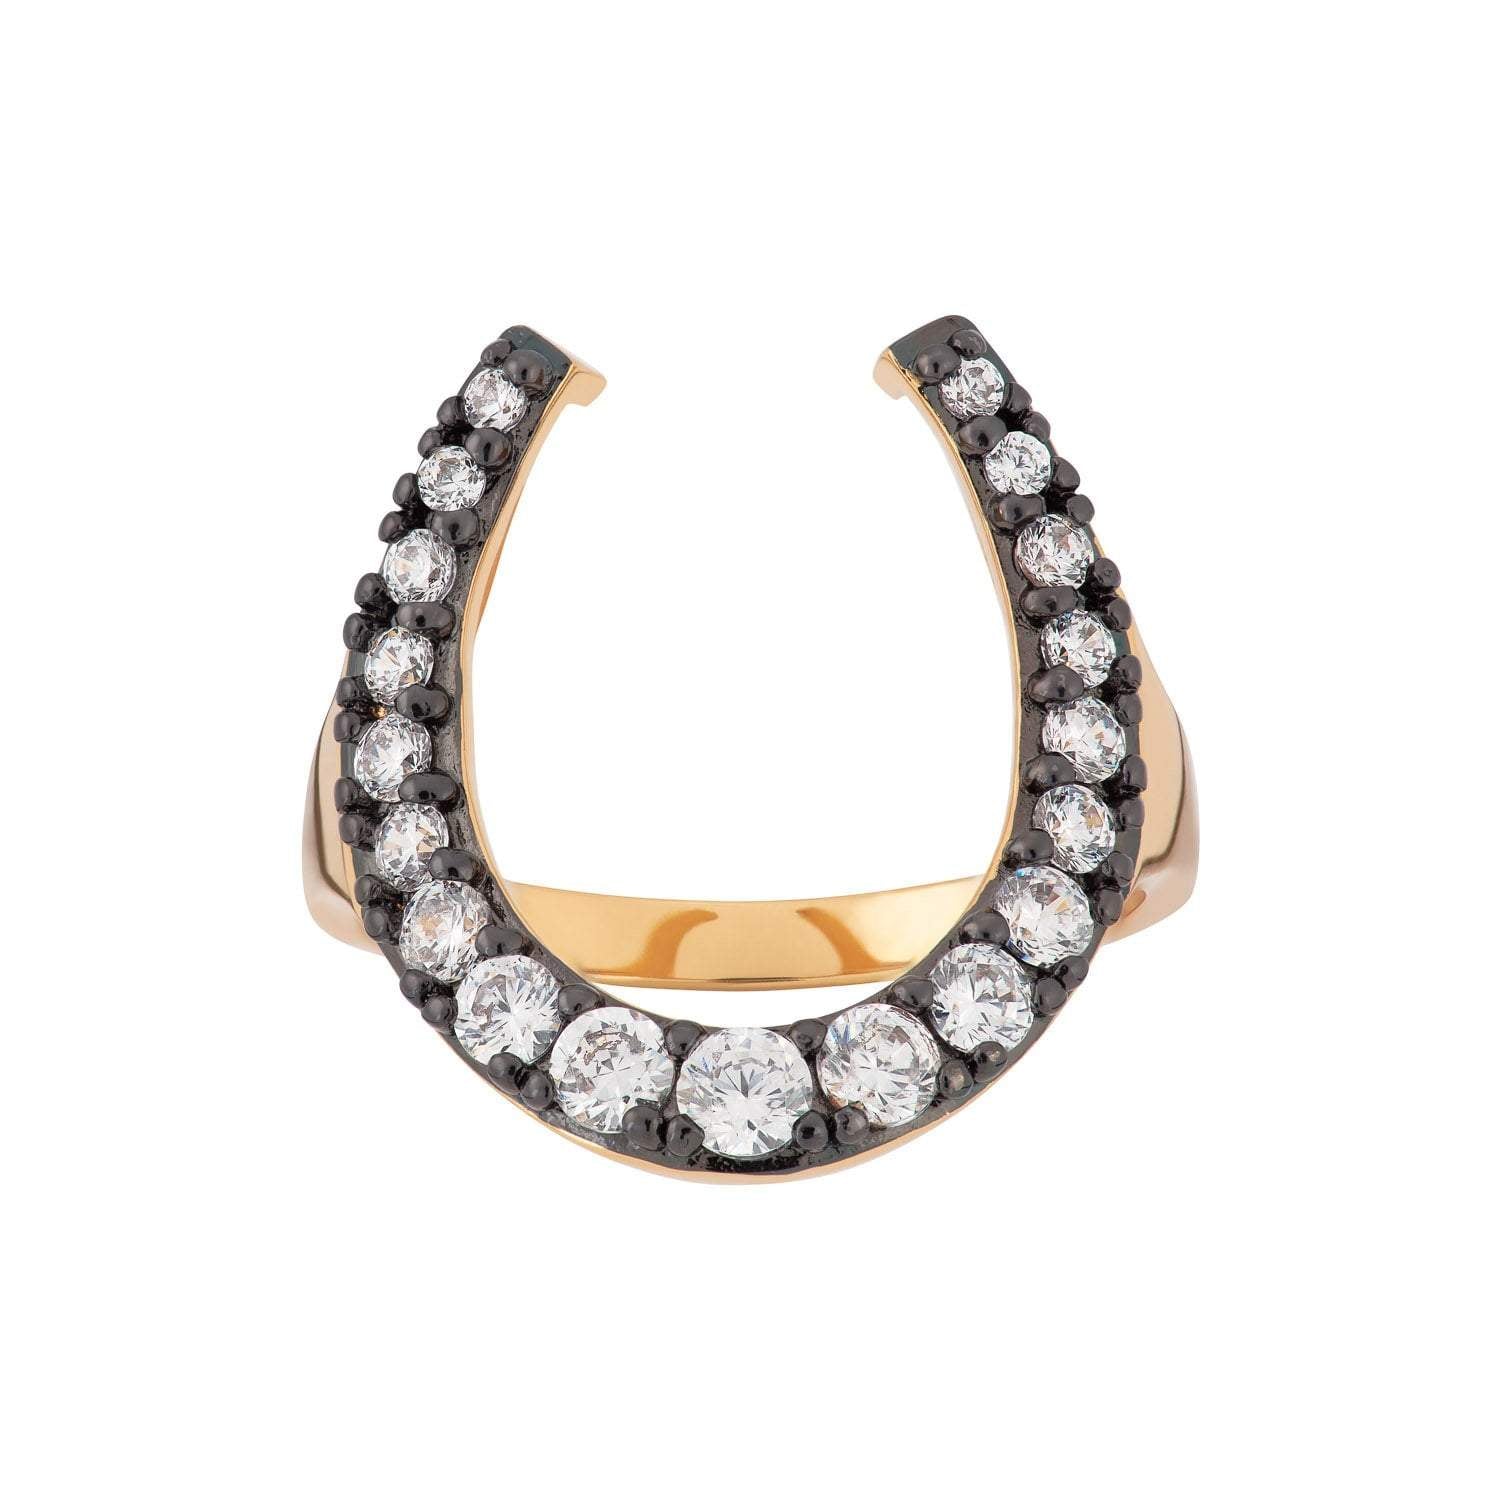  Black Horseshoe Ring with Clear Stones - by Scream Pretty